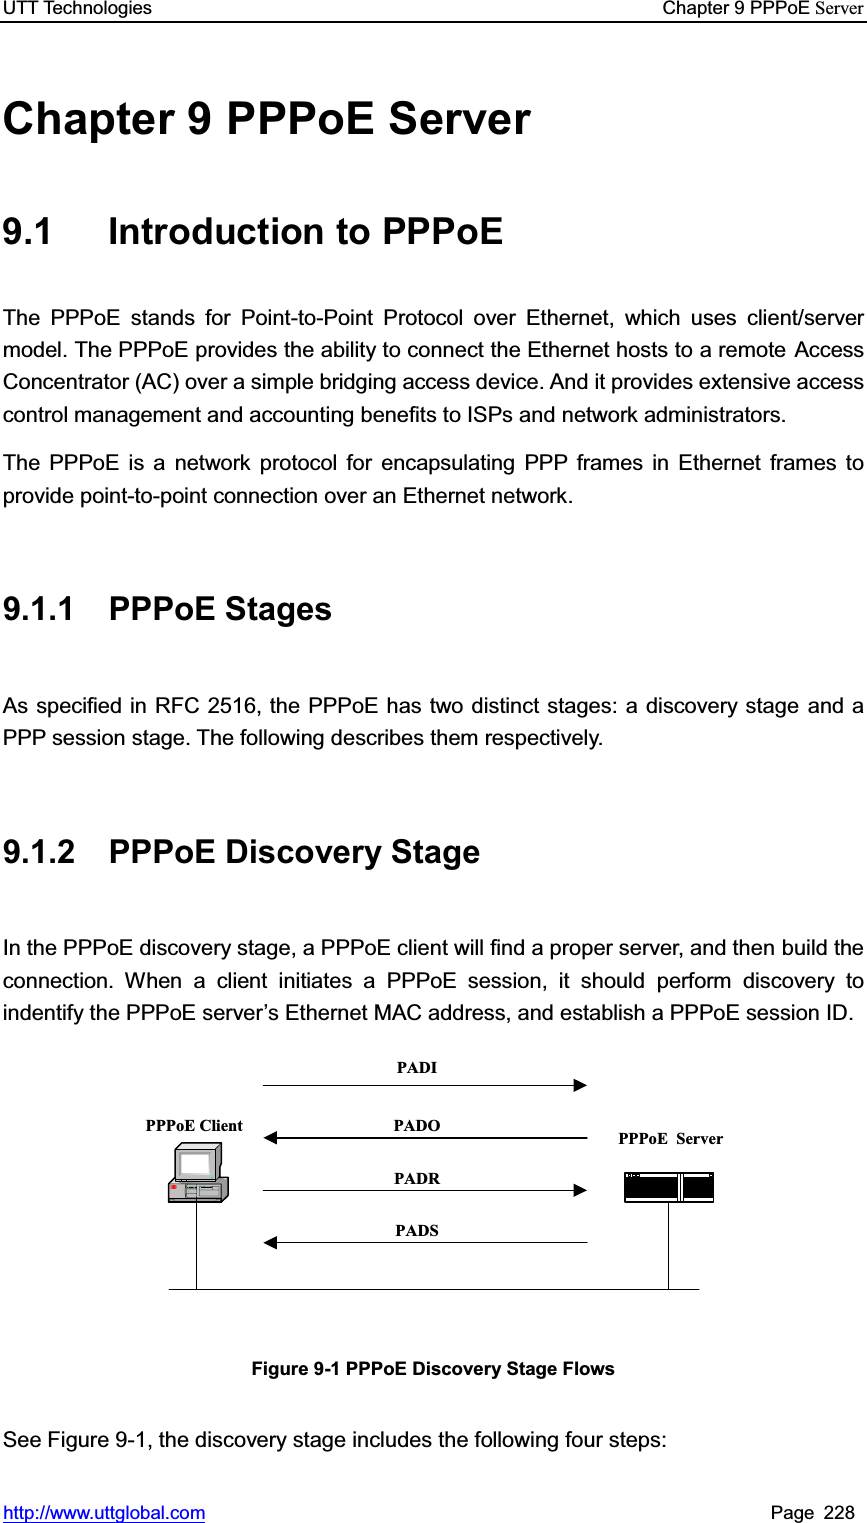 UTT Technologies    Chapter 9 PPPoE Serverhttp://www.uttglobal.com Page 228 Chapter 9 PPPoE Server 9.1 Introduction to PPPoE The PPPoE stands for Point-to-Point Protocol over Ethernet, which uses client/server model. The PPPoE provides the ability to connect the Ethernet hosts to a remote Access Concentrator (AC) over a simple bridging access device. And it provides extensive access control management and accounting benefits to ISPs and network administrators.   The PPPoE is a network protocol for encapsulating PPP frames in Ethernet frames to provide point-to-point connection over an Ethernet network.   9.1.1 PPPoE Stages As specified in RFC 2516, the PPPoE has two distinct stages: a discovery stage and a PPP session stage. The following describes them respectively.     9.1.2  PPPoE Discovery Stage In the PPPoE discovery stage, a PPPoE client will find a proper server, and then build the connection. When a client initiates a PPPoE session, it should perform discovery to indentify the PPPoE server¶s Ethernet MAC address, and establish a PPPoE session ID. PPPoE Client PPPoE ServerPADIPADOPADRPADSFigure 9-1 PPPoE Discovery Stage Flows See Figure 9-1, the discovery stage includes the following four steps: 